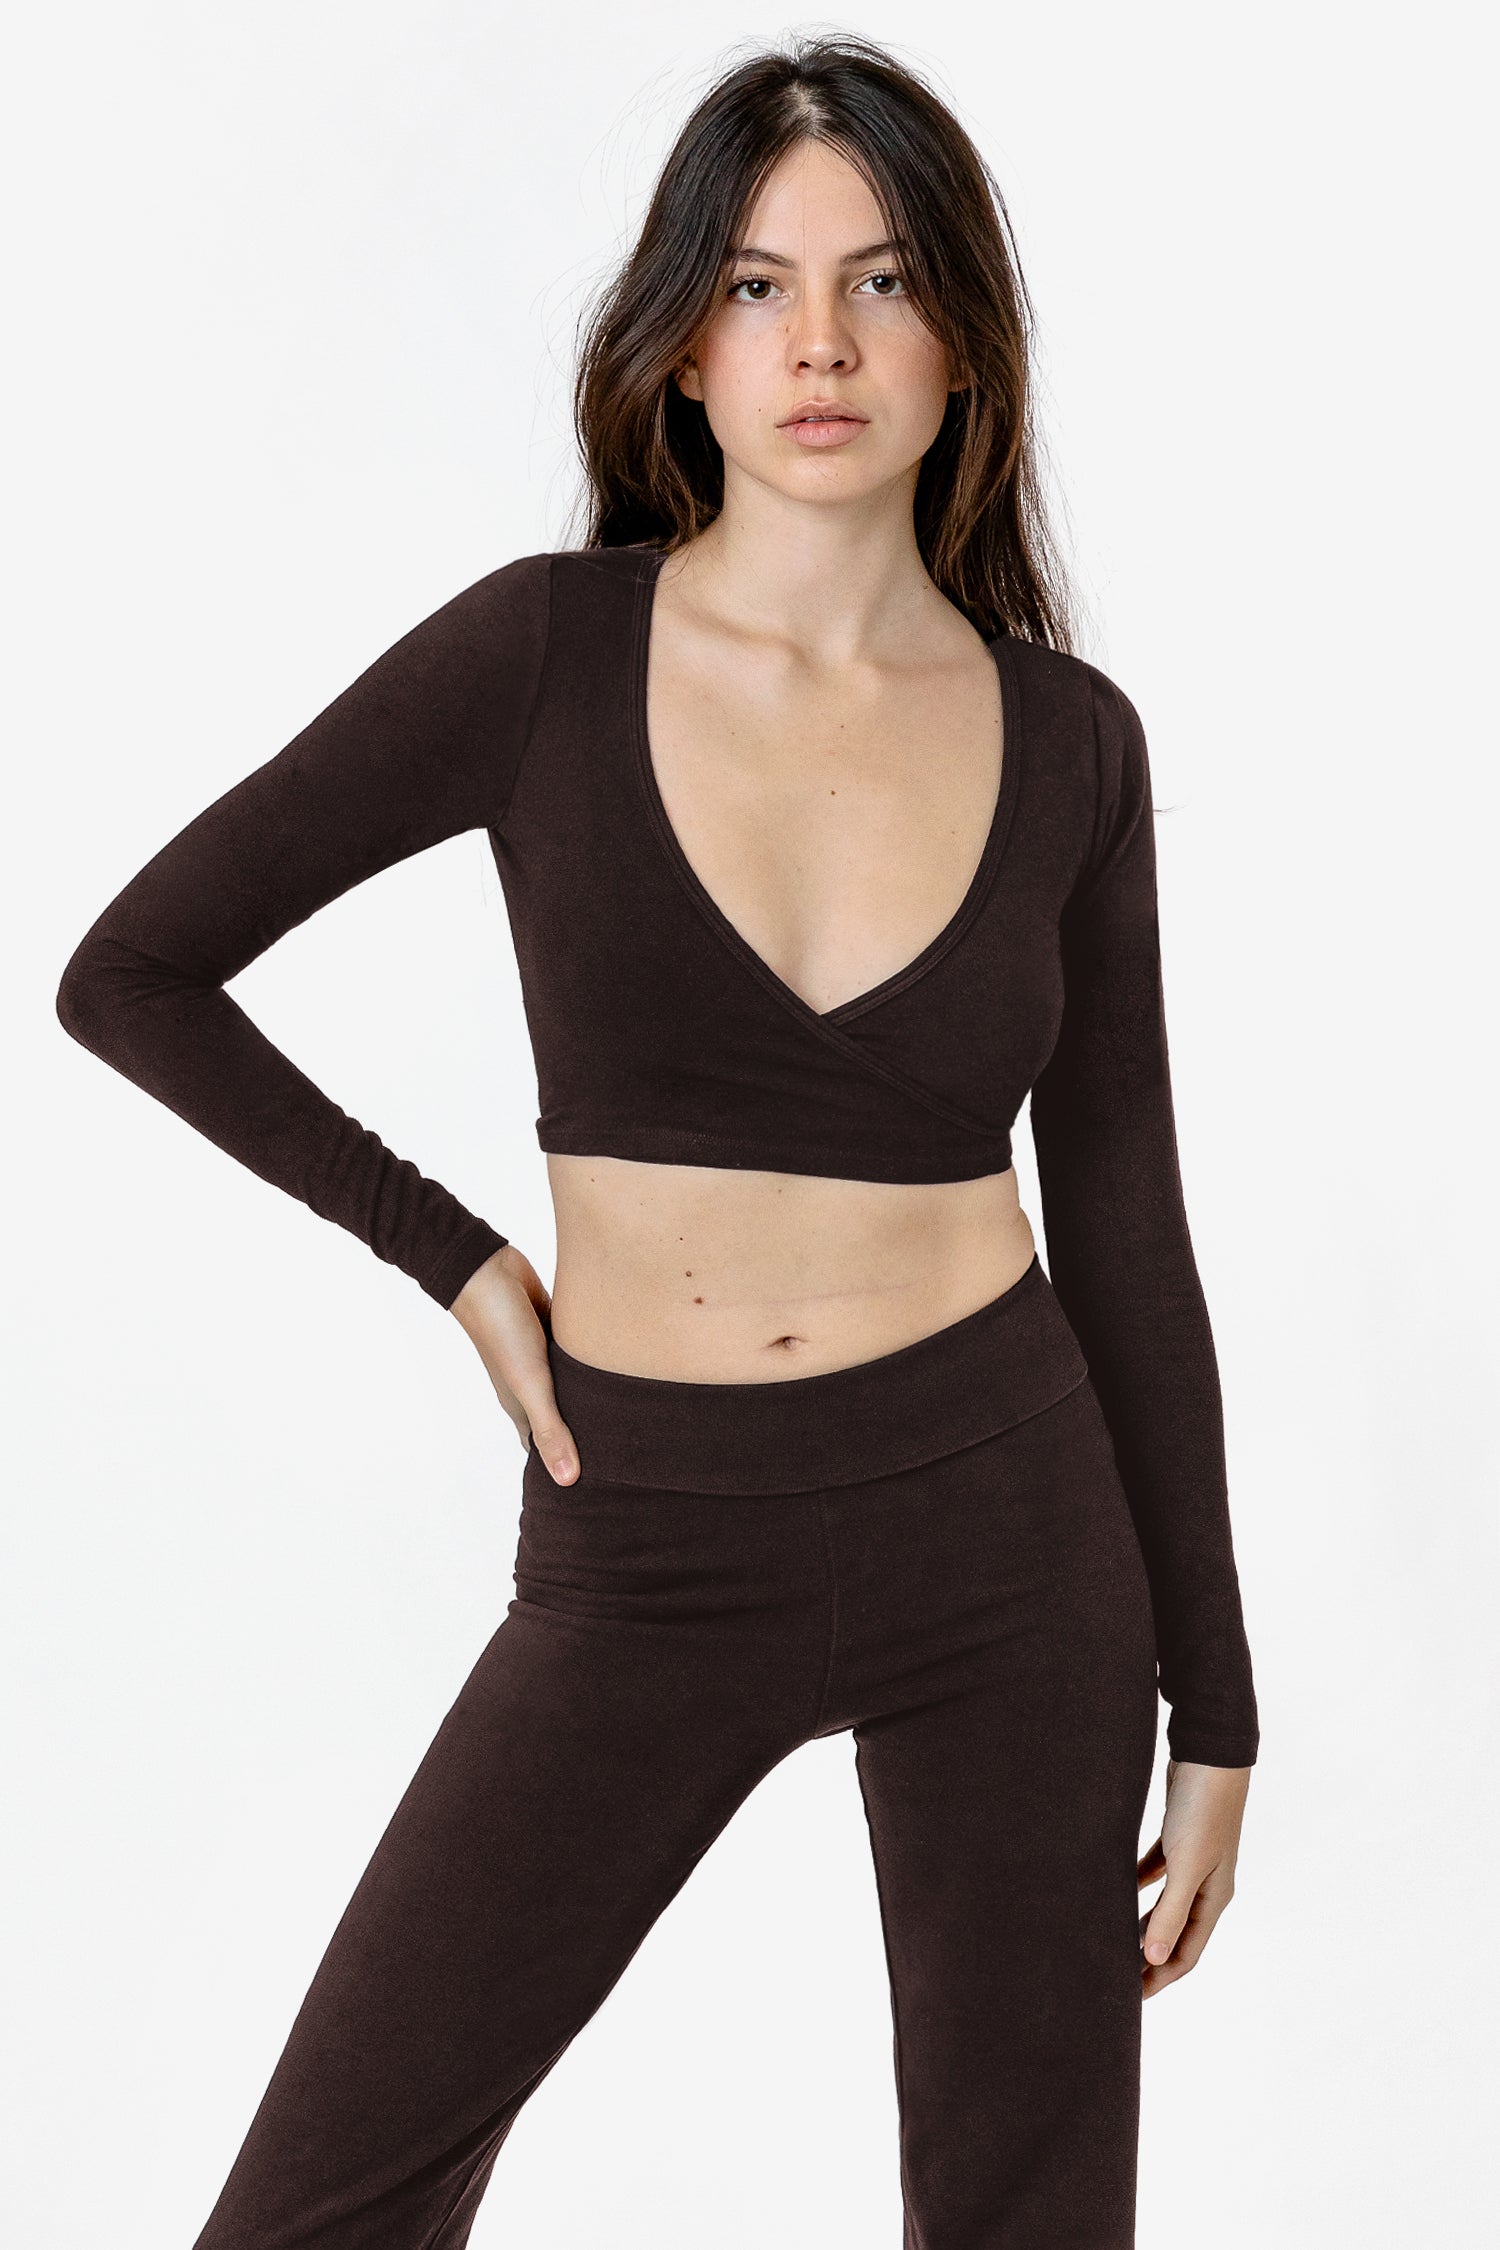 Wilfred Free GO-TO CROPPED LONGSLEEVE